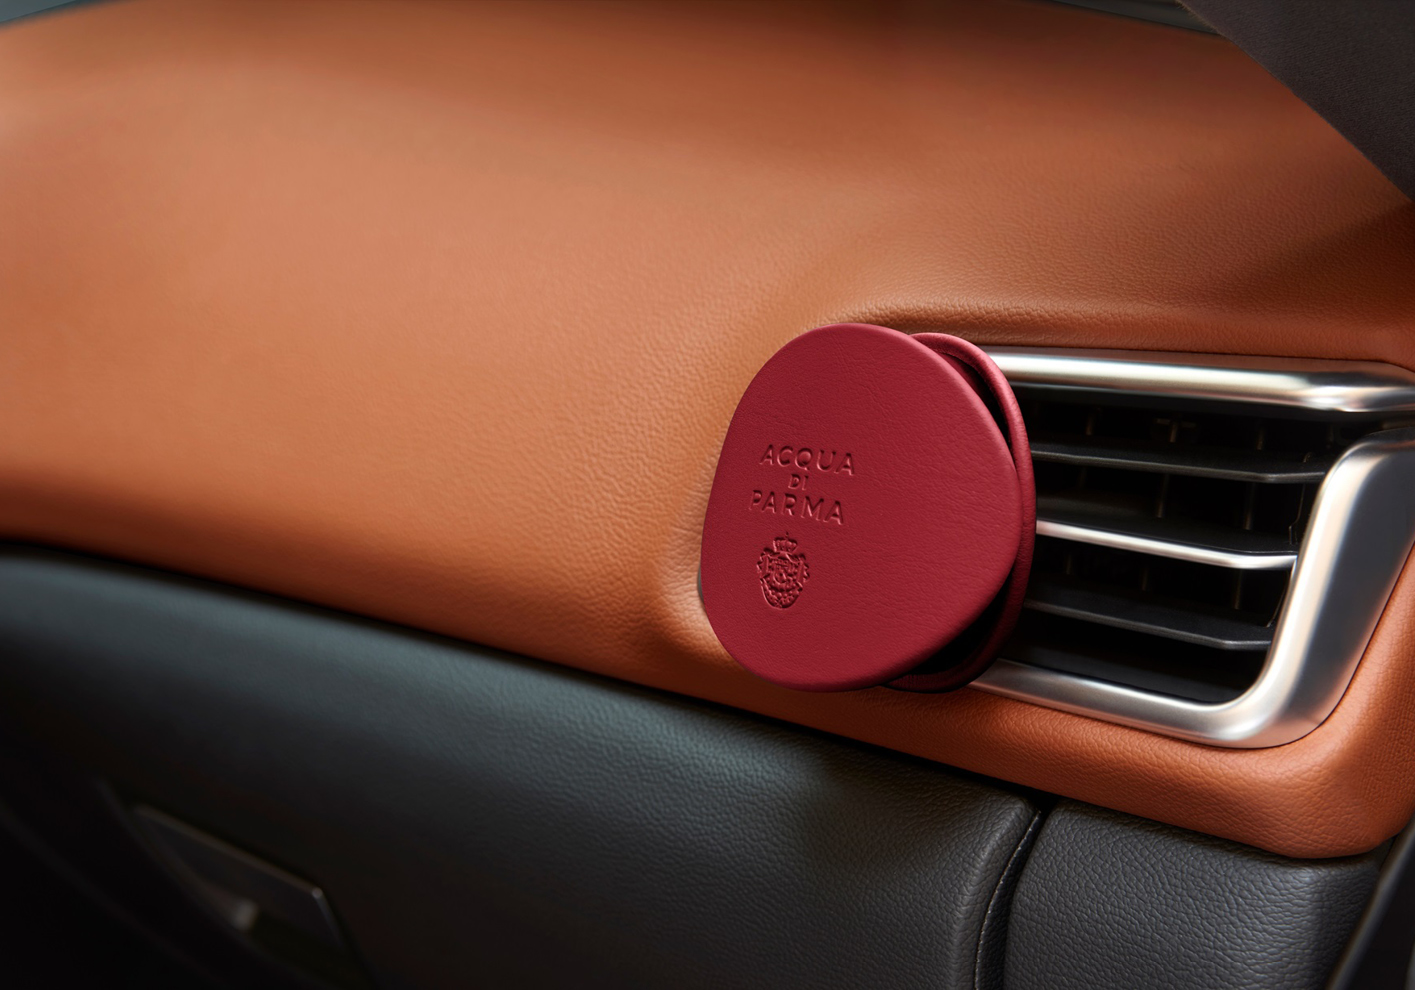 Acqua di Parma’s Red Car Diffuser features a leather cover that can be filled with a choice of 10 different scents